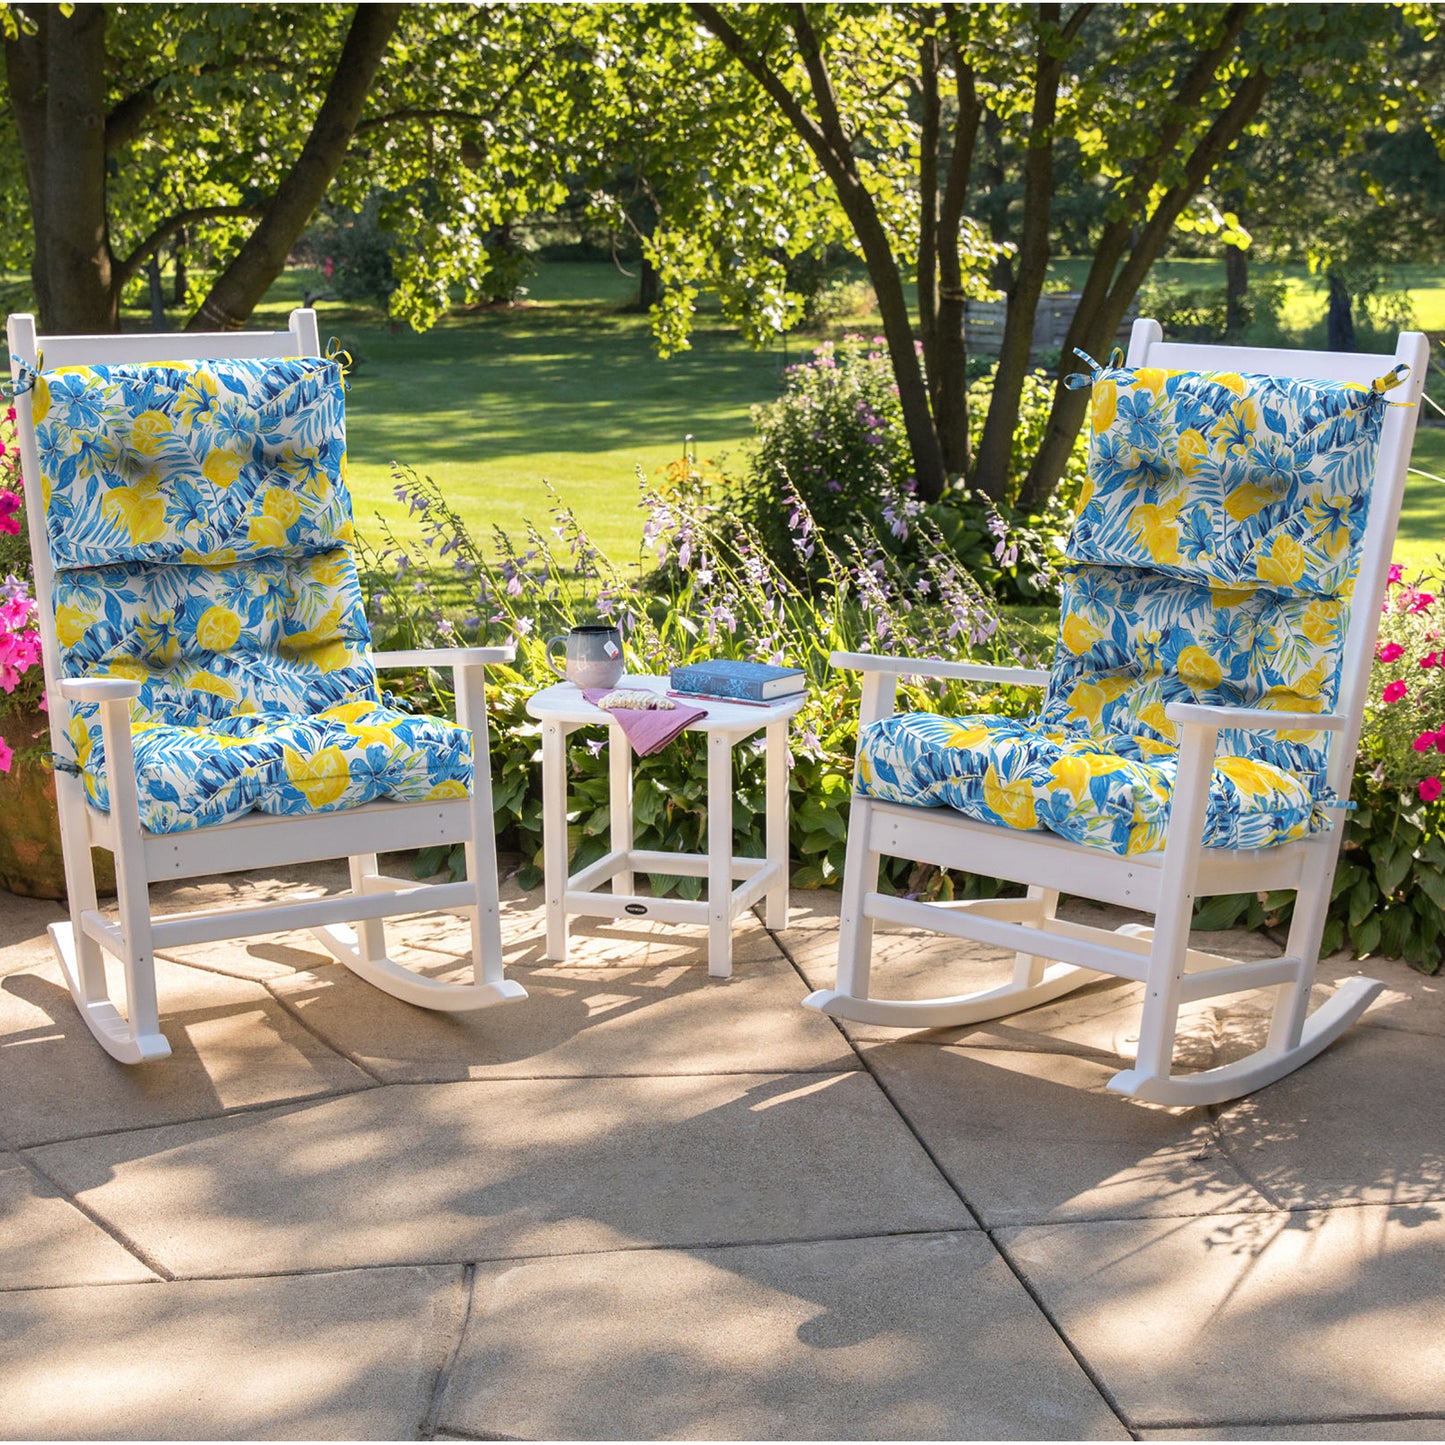 Melody Elephant Outdoor Tufted High Back Chair Cushions, Water Resistant Rocking Seat Chair Cushions 2 Pack, Adirondack Cushions for Patio Home Garden, 22" W x 20" D, Lemon Blossom Blue